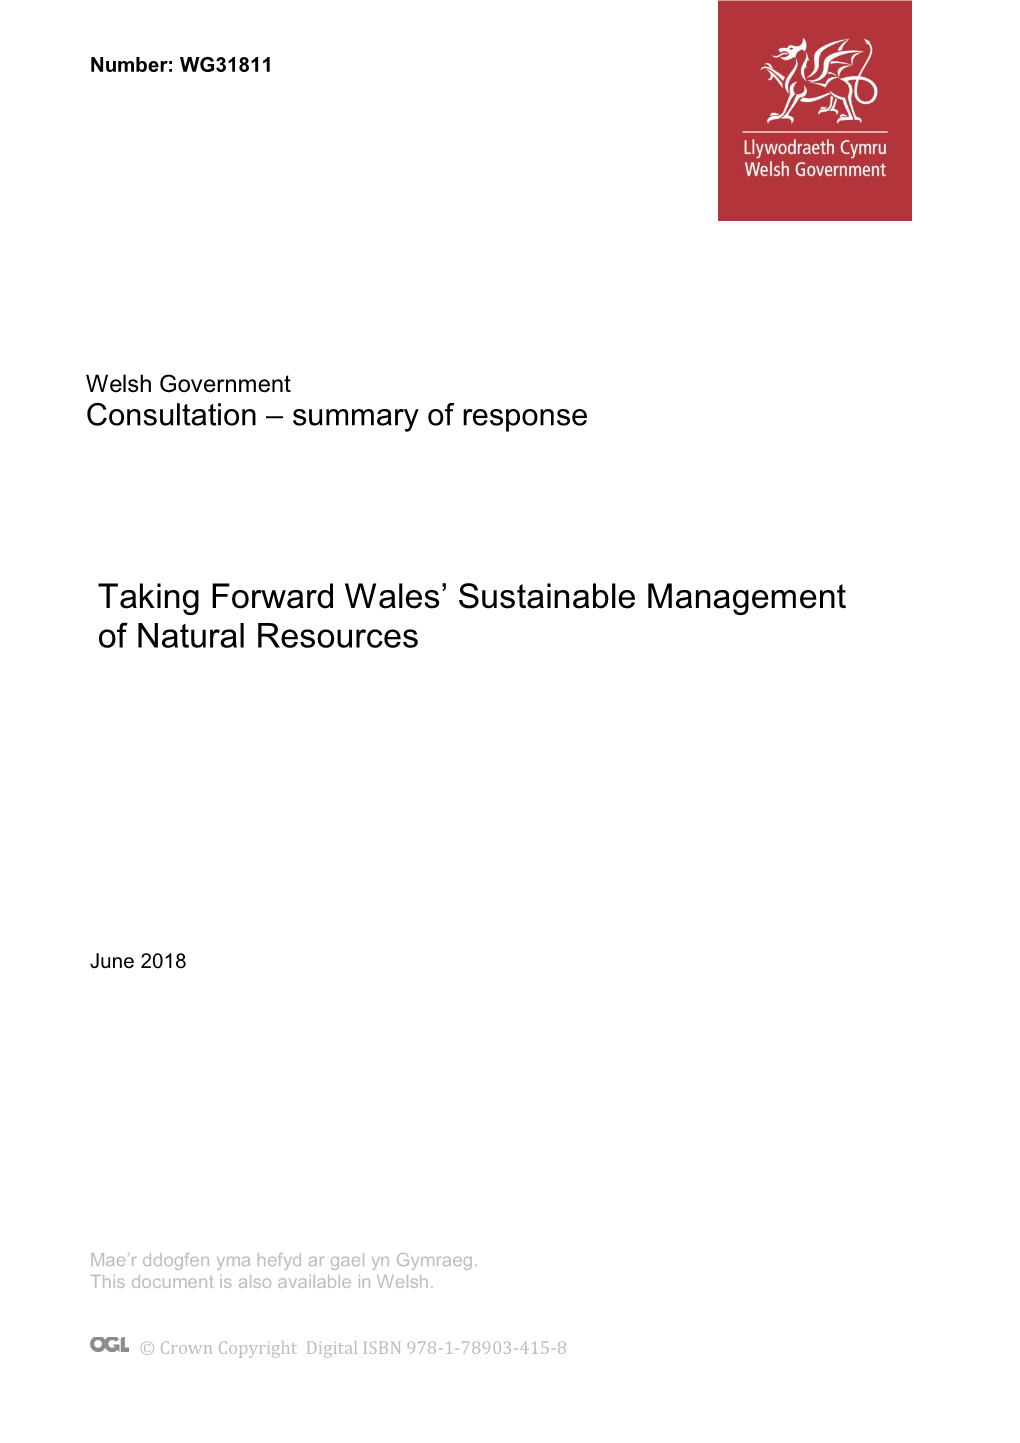 Taking Forward Wales' Sustainable Management of Natural Resources